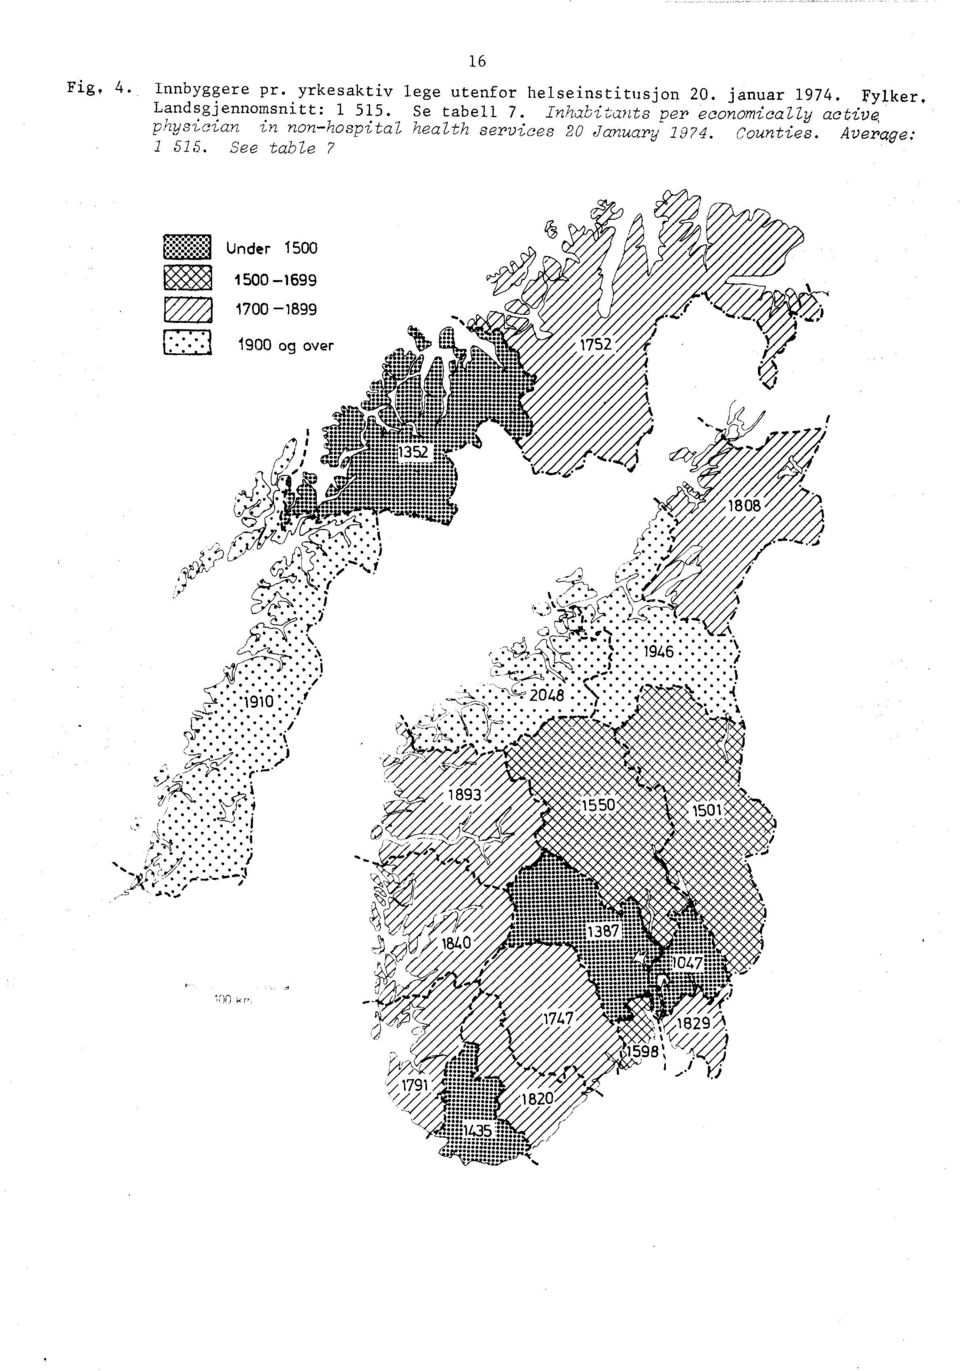 Inhabitants per economically active, physician in nonhospital health services 0 January 97.